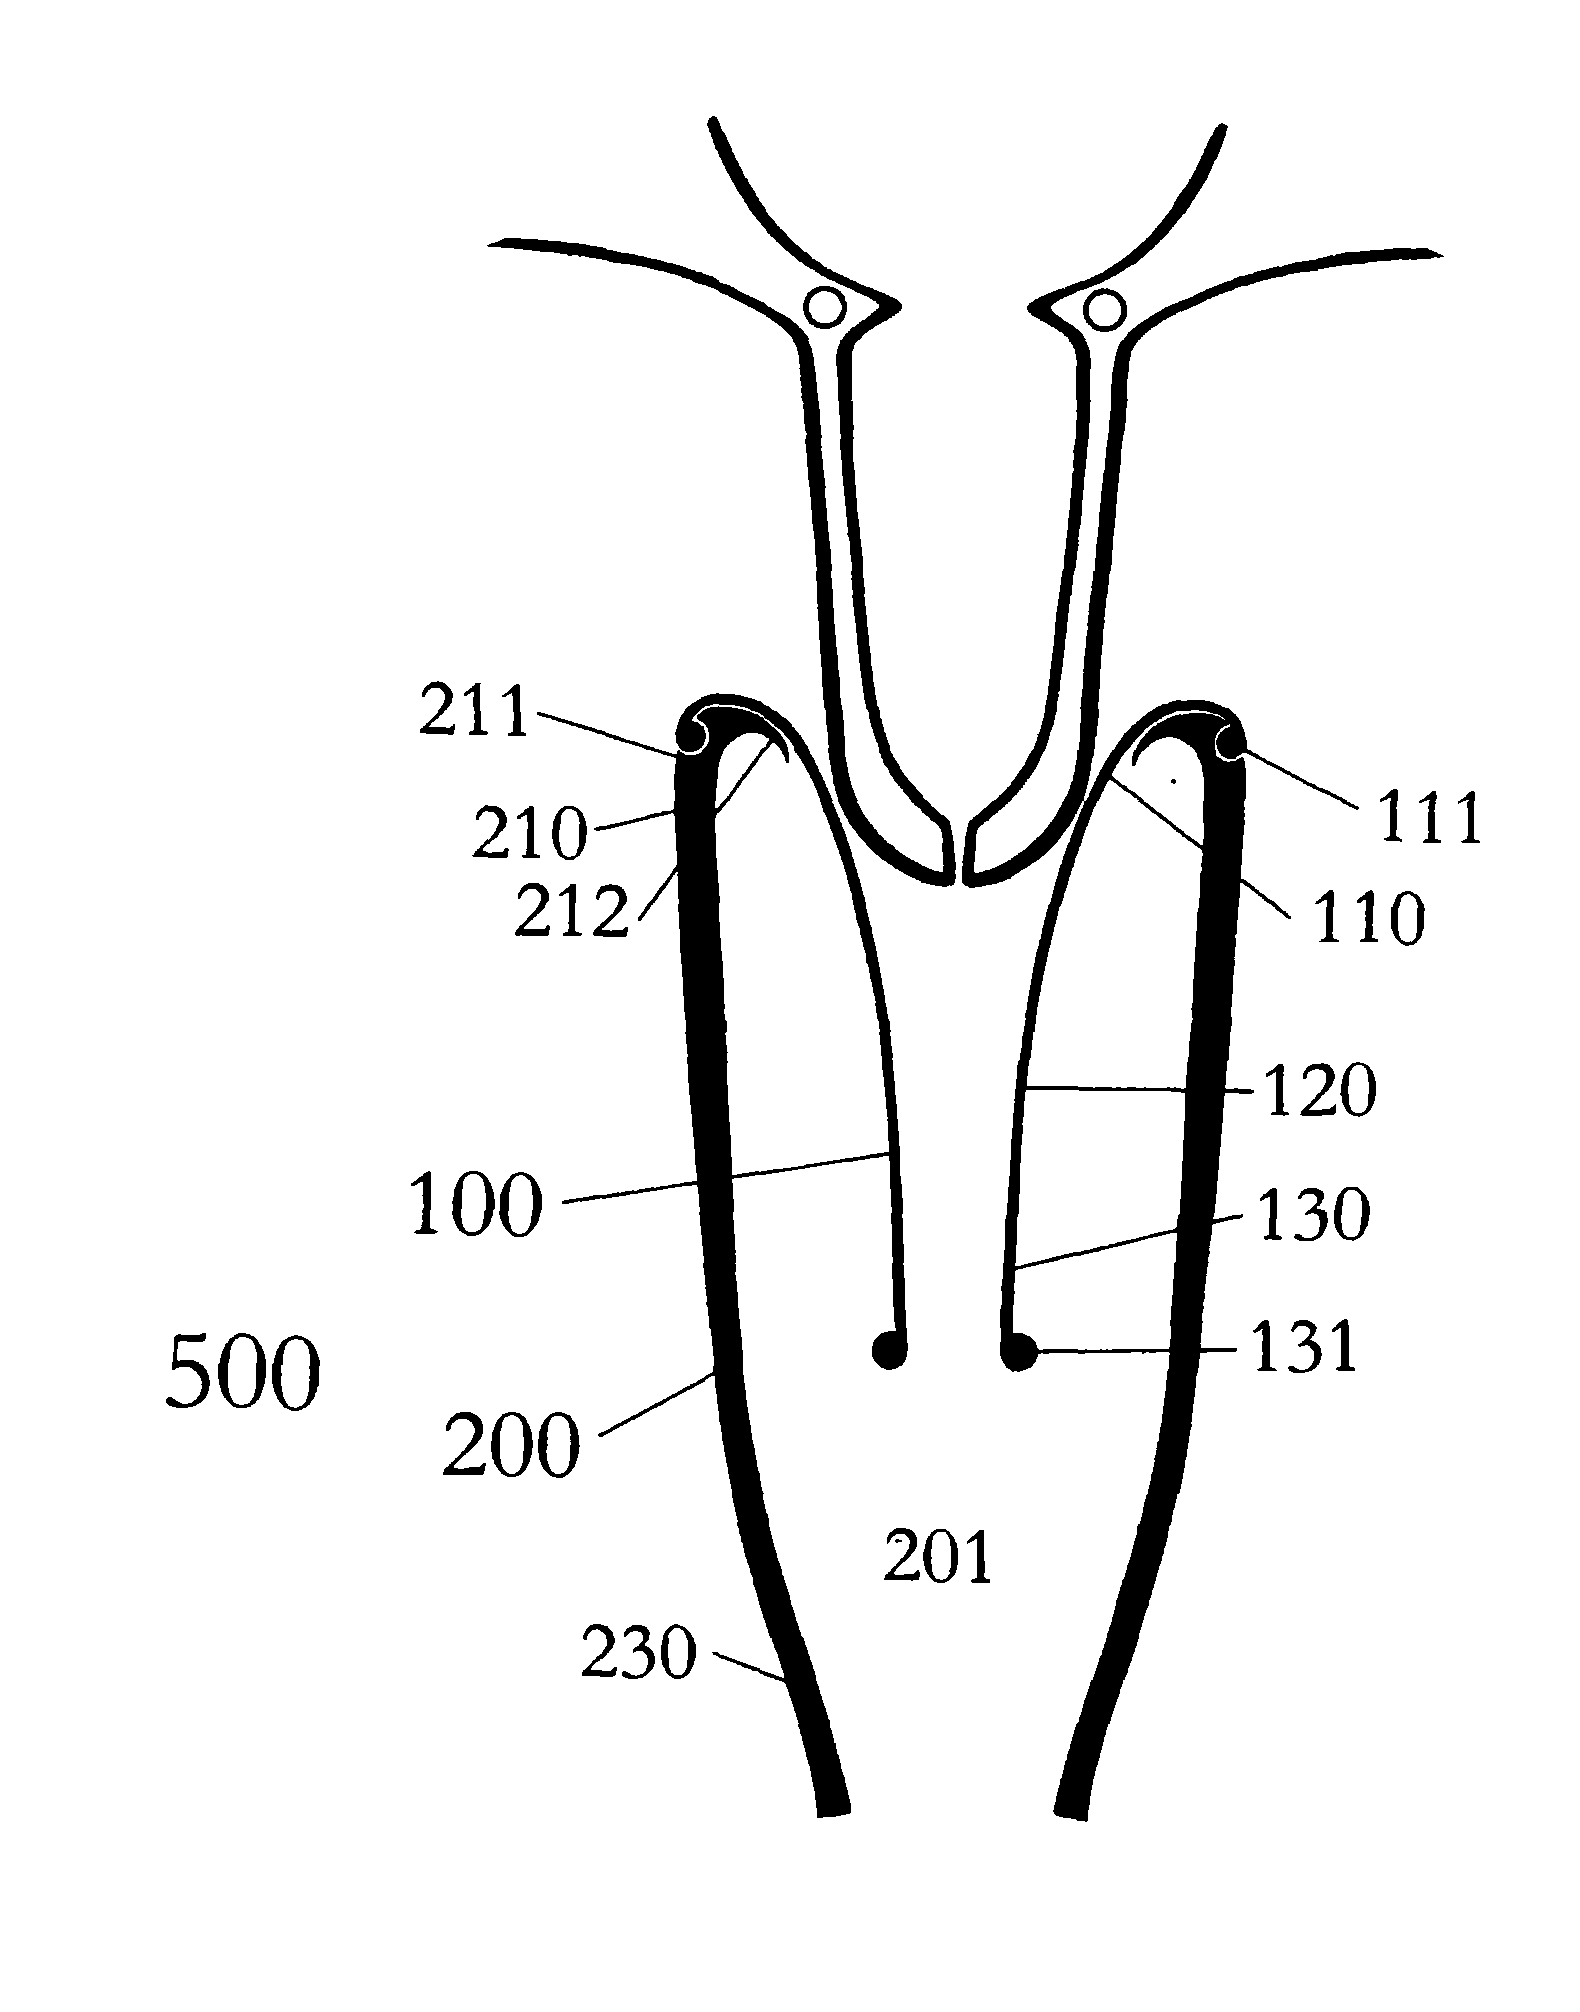 System and method for eliciting milk from mammals